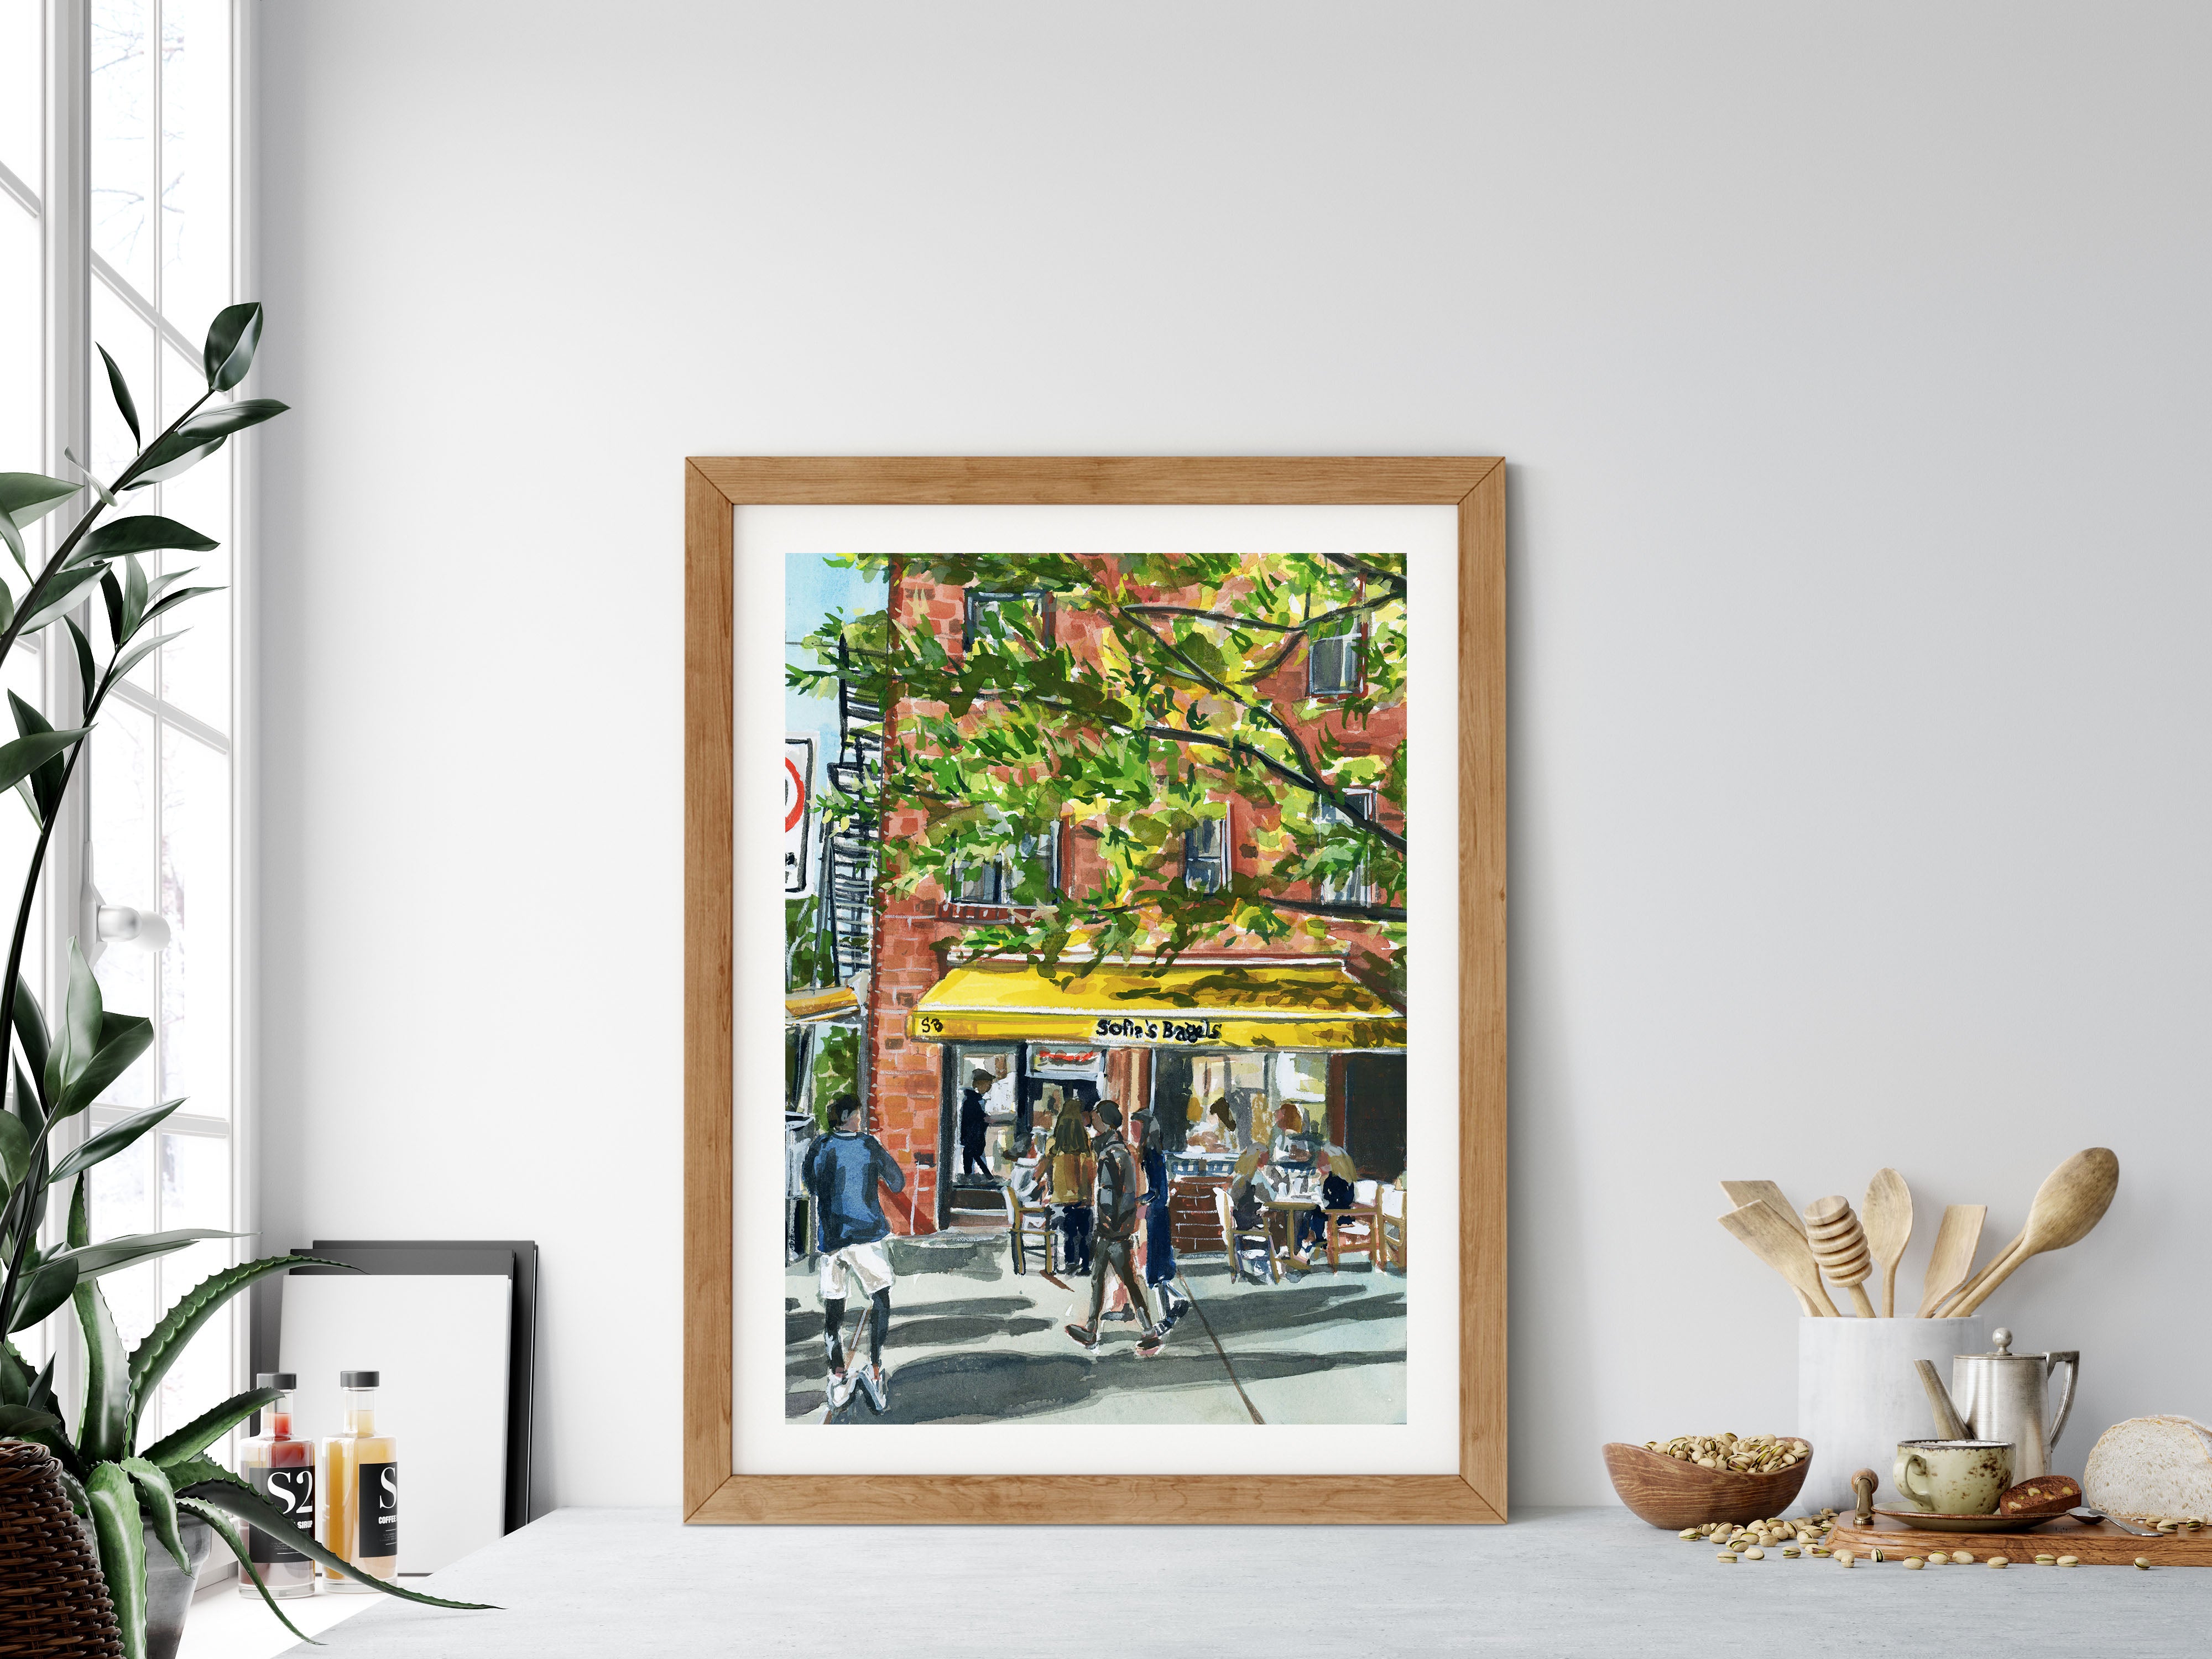 Sofia’s Bagels print of painting by Medjool Studio. Print of original gouache painting of Sofia's Bagel Cafe in Greenwich Village, NYC, captured in a serene morning scene using soft hues and delicate brush strokes.